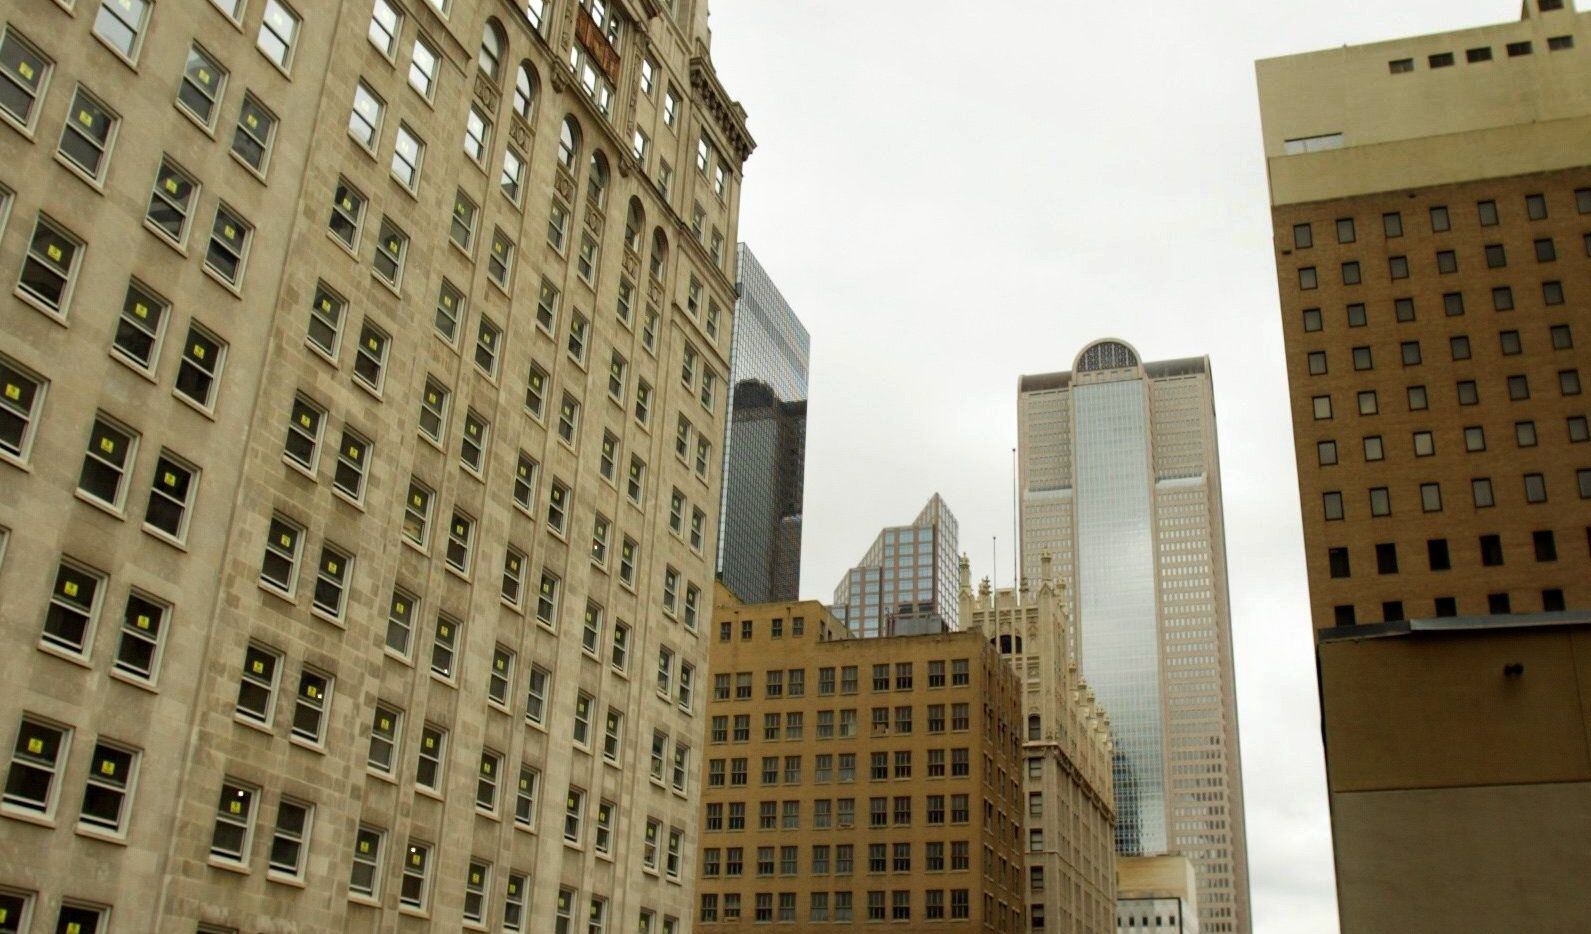 The Davis Building (left) on Main Street in downtown Dallas, is one of the state's largest...